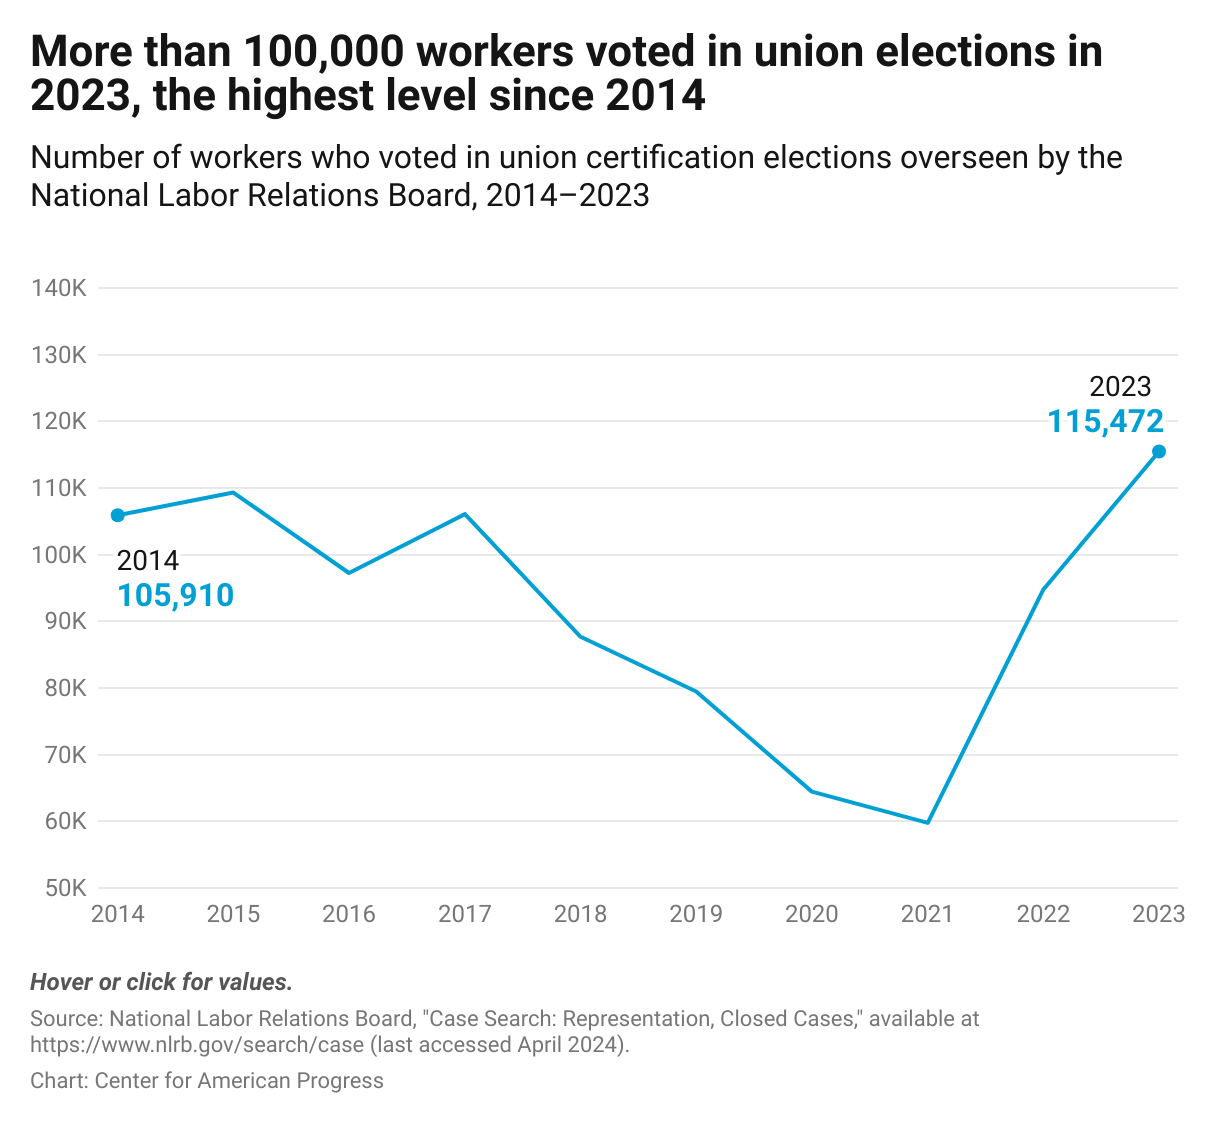 Line chart showing that the number of workers participating in union elections reached 115,472 in 2023, the highest level since 2014.